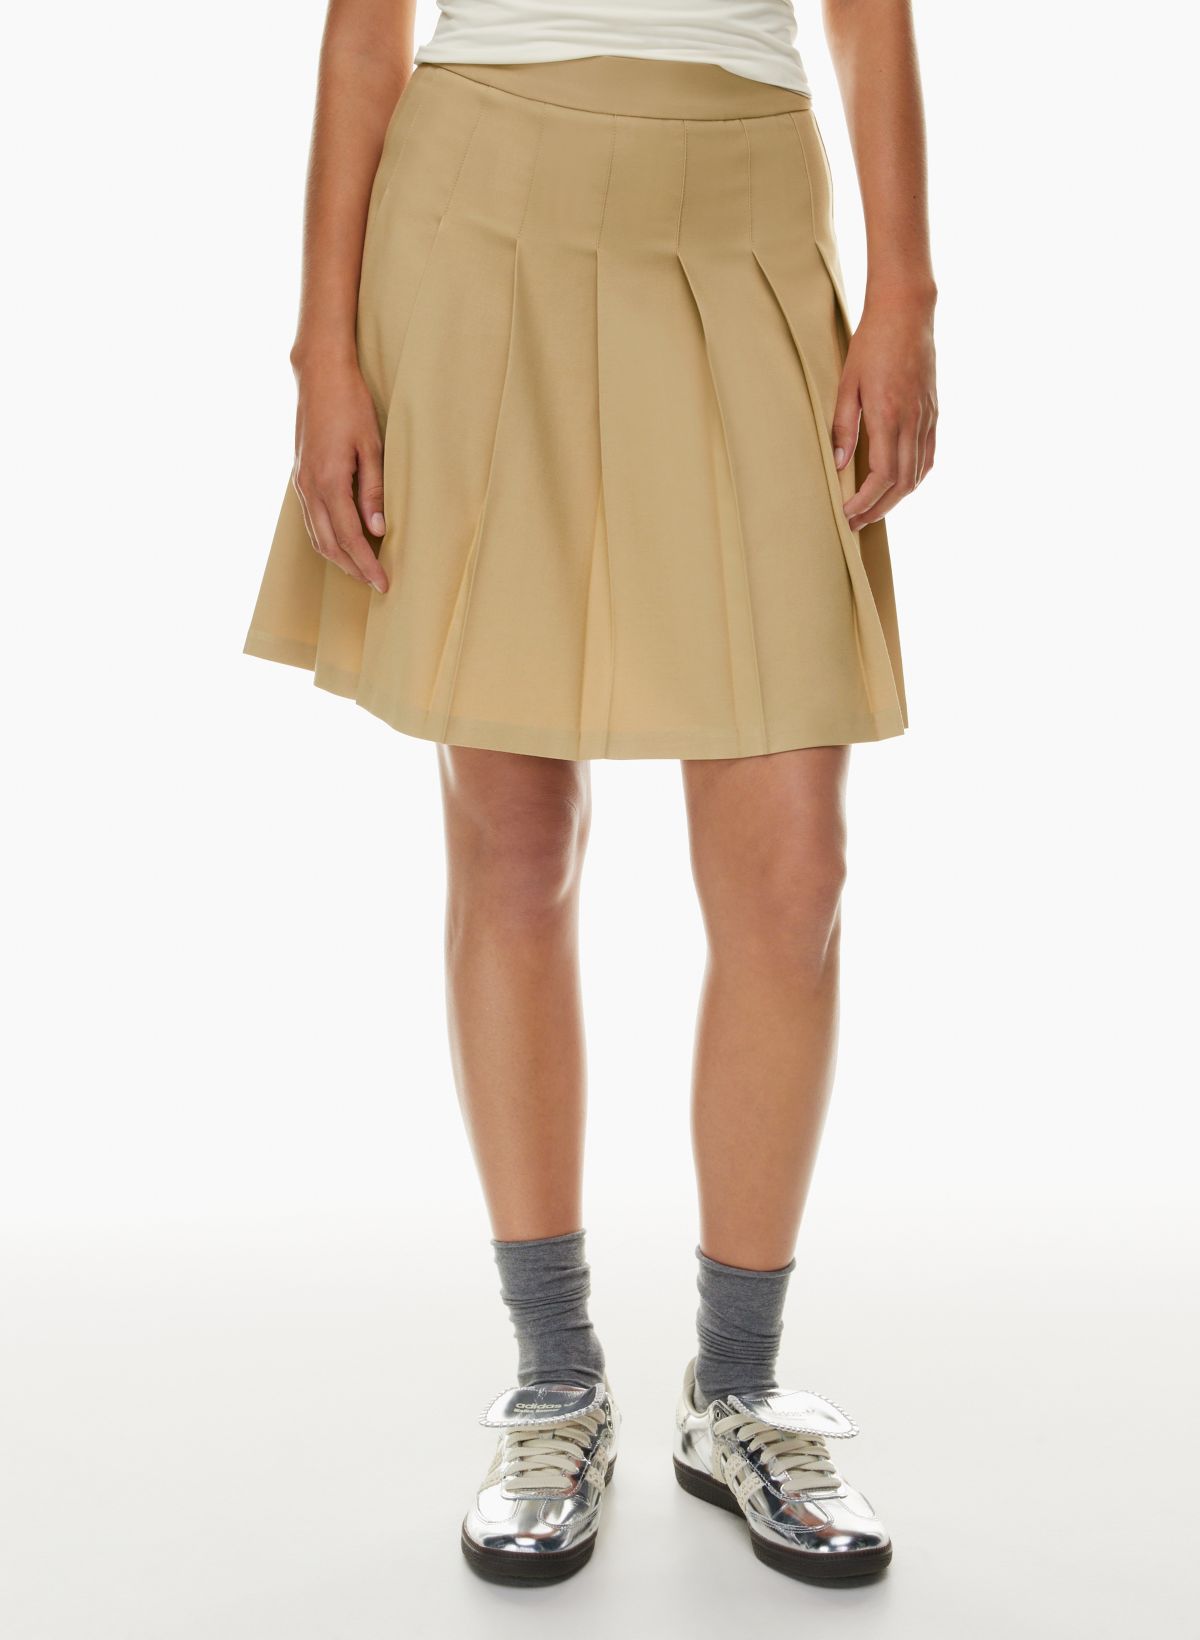 Pleated Skirts, Short & Long Pleated Skirts